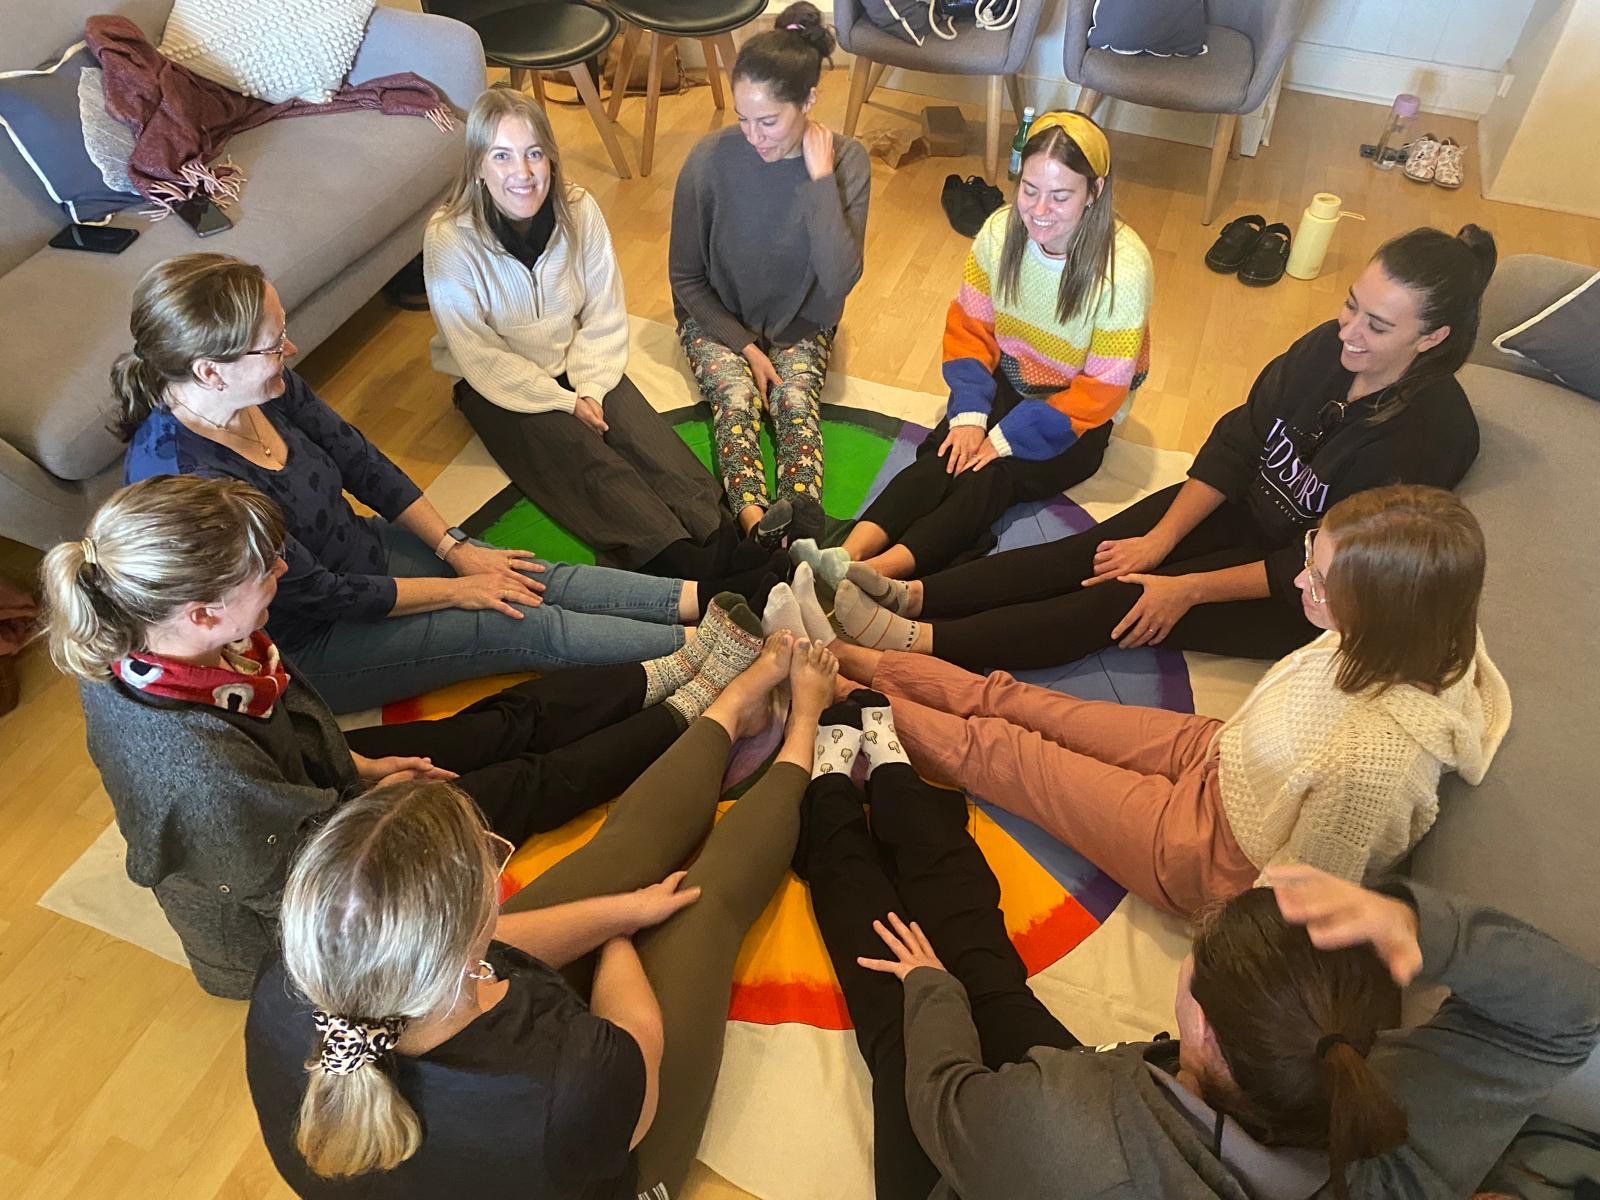 For the team at MAMA, education is so important, not just for you but for us too! 

A couple of weeks ago our midwife team caught up at Warragul Natural Health where we learnt not only about one another but also had enneagram session where we learnt 